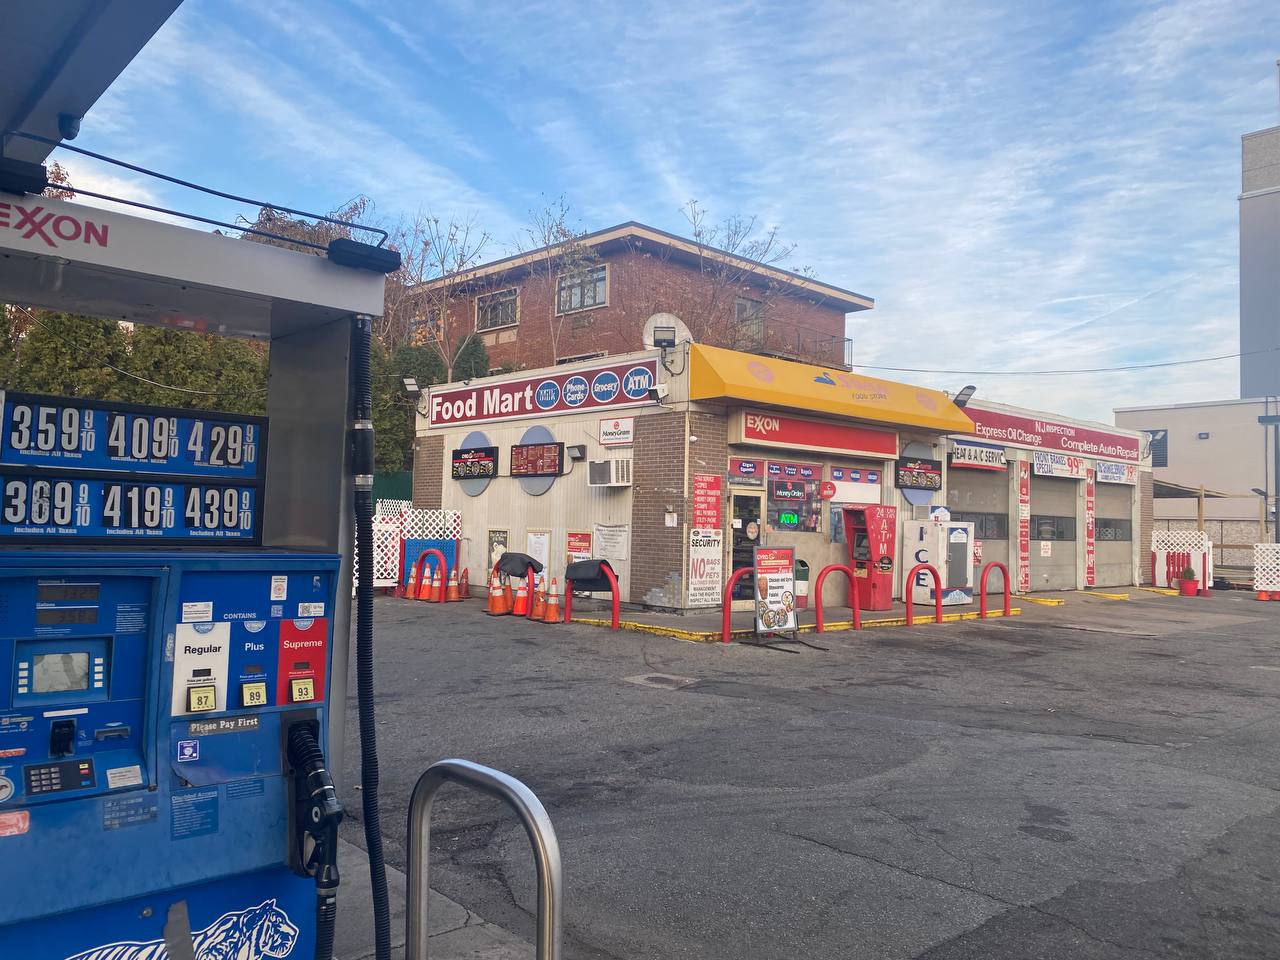 Getcoins - Bitcoin ATM - Inside of Exxon in East Orange, New Jersey